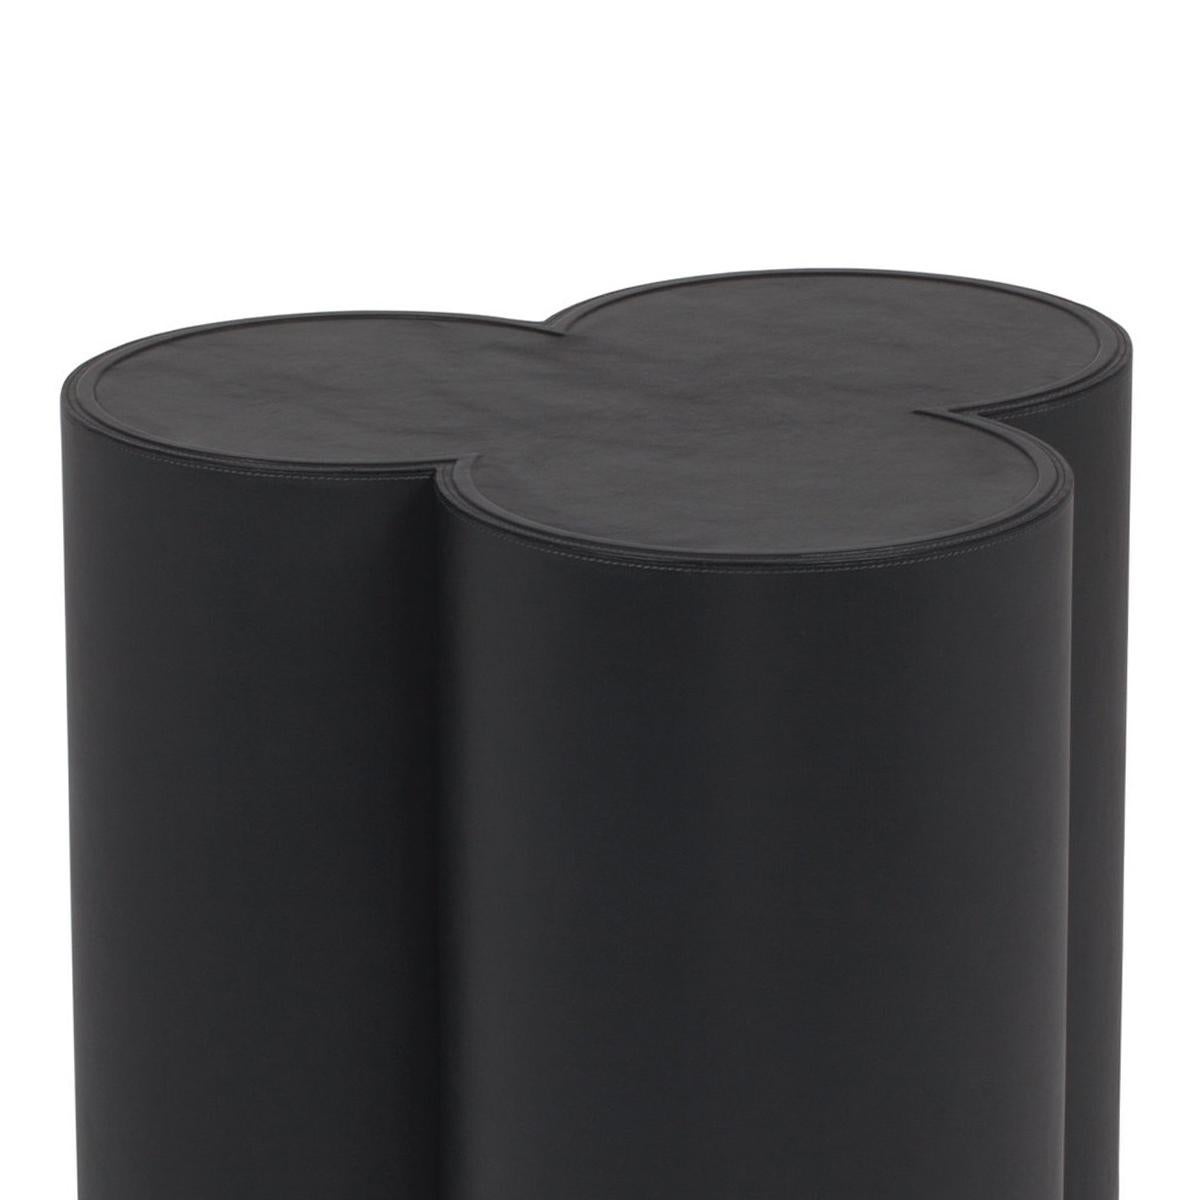 Stool Clover Black with wooden structure covered with
High quality genuine italian leather in black color. 
Also available with other leather on request.